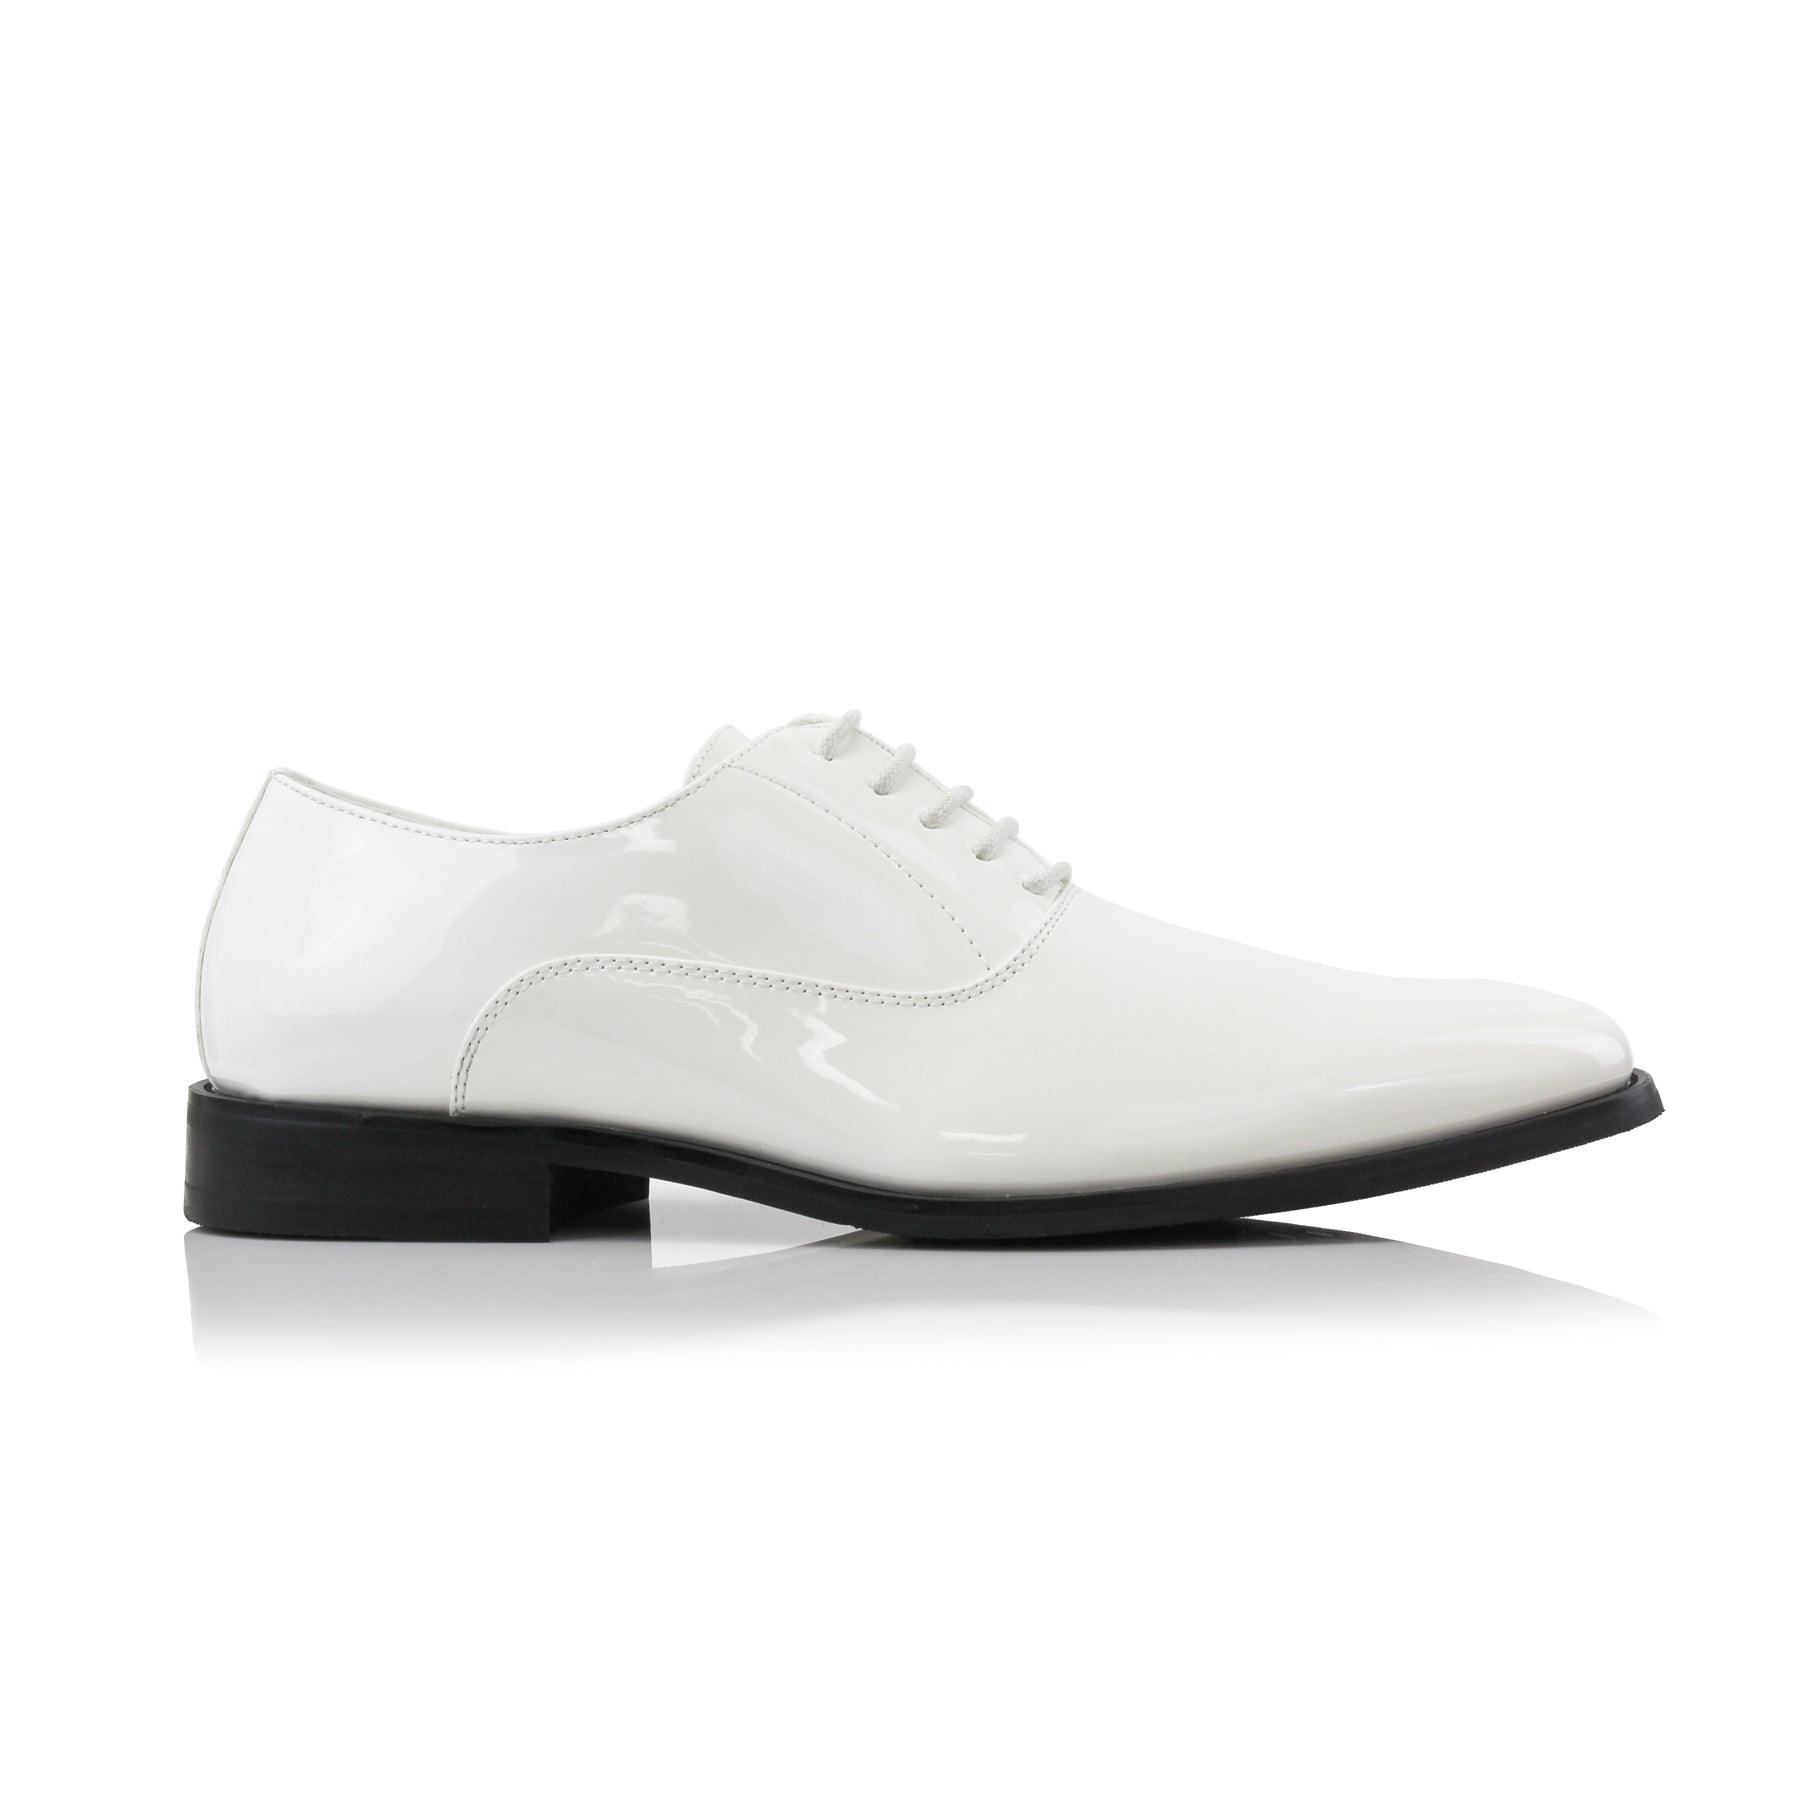 Faux Patent Leather Oxfords | George by Ferro Aldo | Conal Footwear | Outer Side Angle View